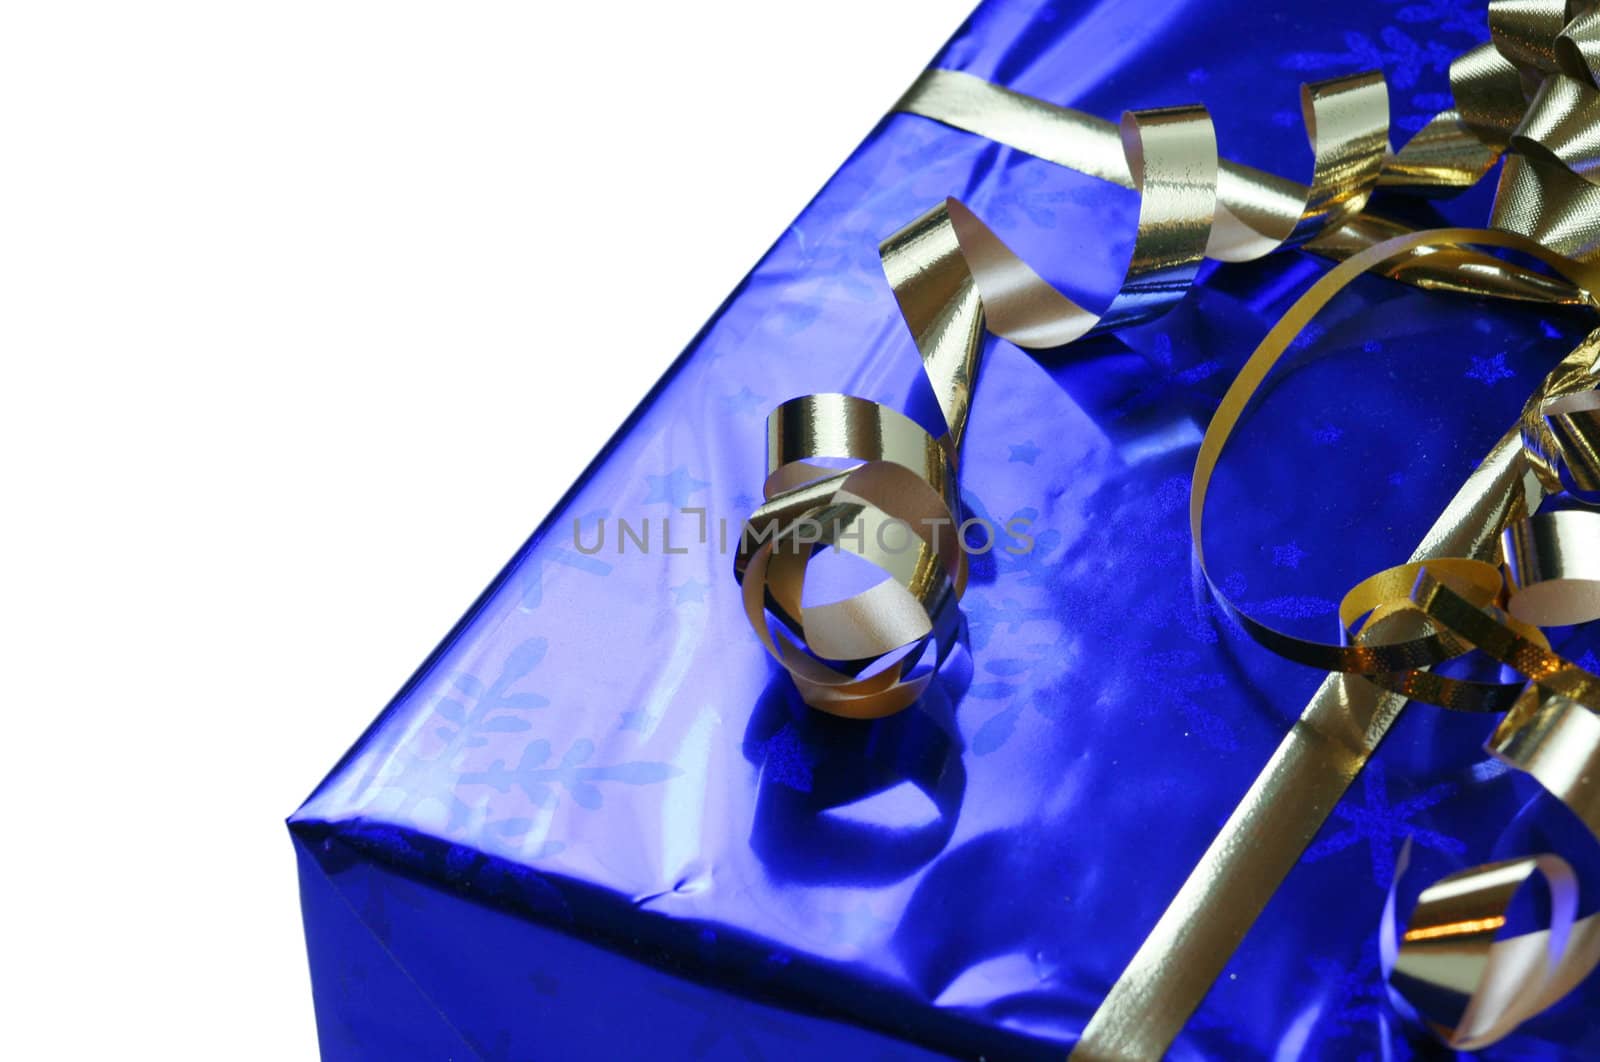 Shiny blue gift with gold ribbons, shallow depth of field, focus on ribbons